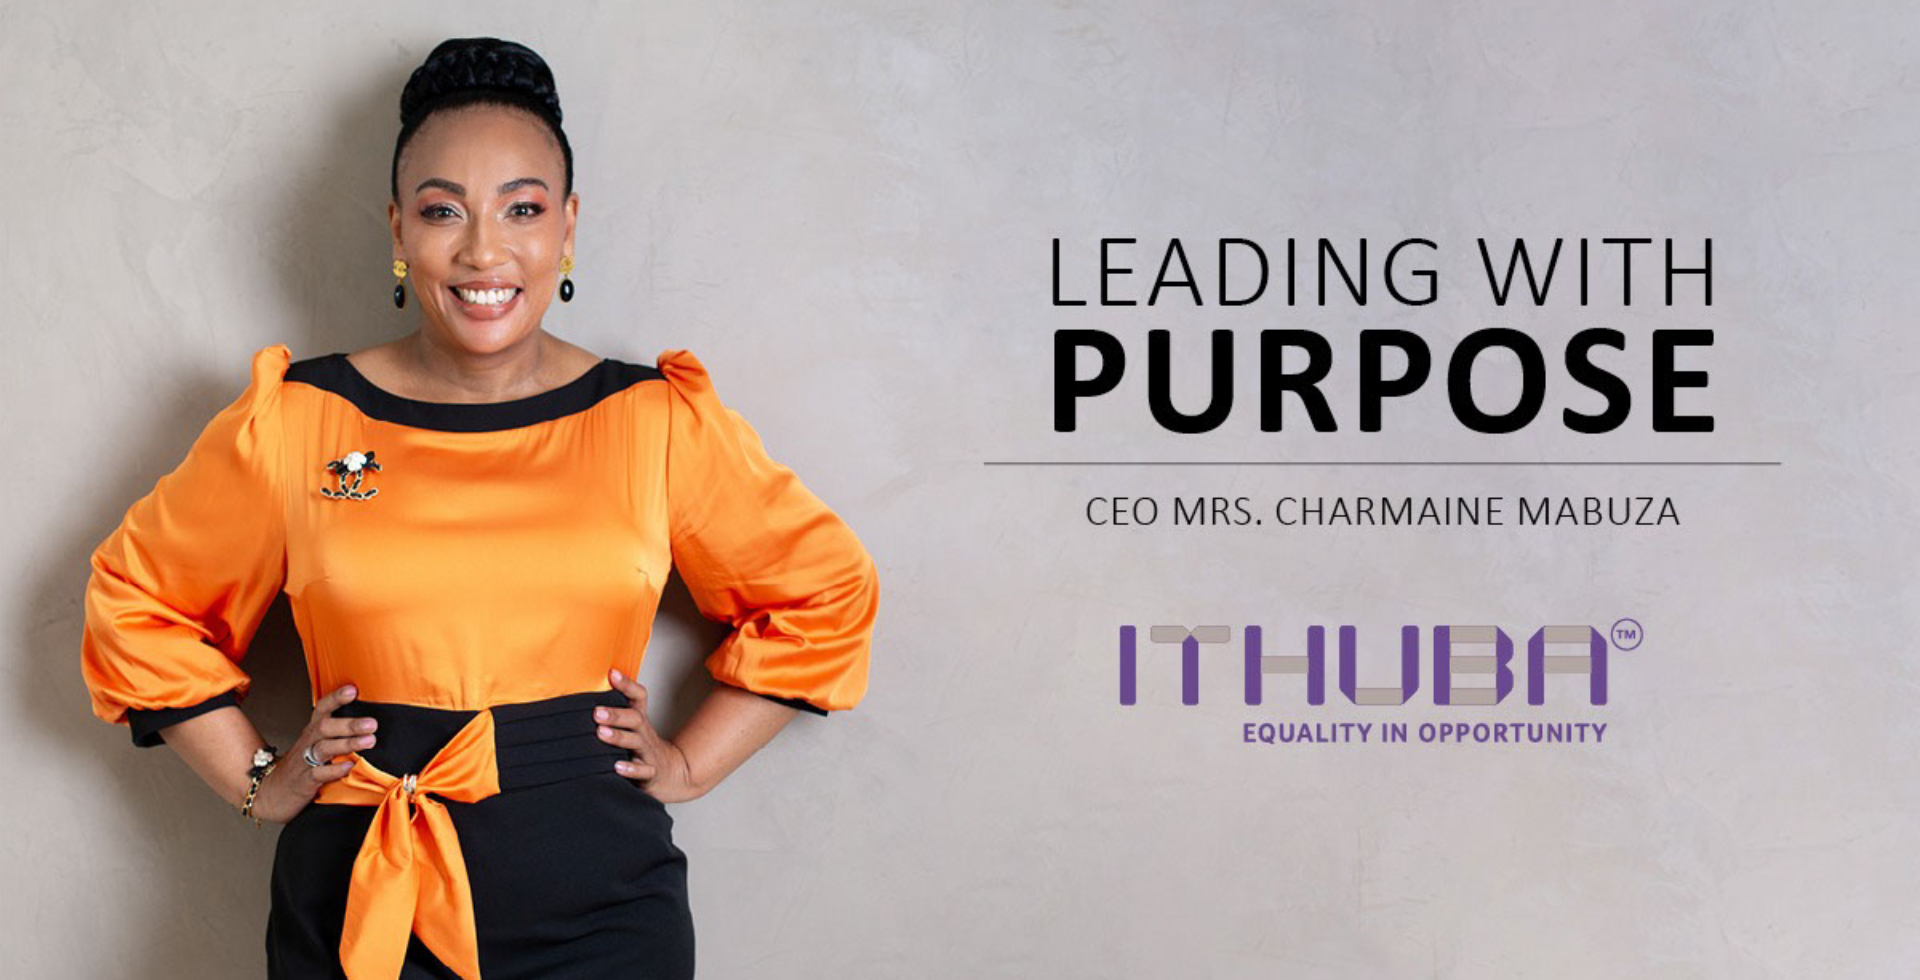 Transforming Lives: ITHUBA Invests In a Brighter Future for South Africa Through Education